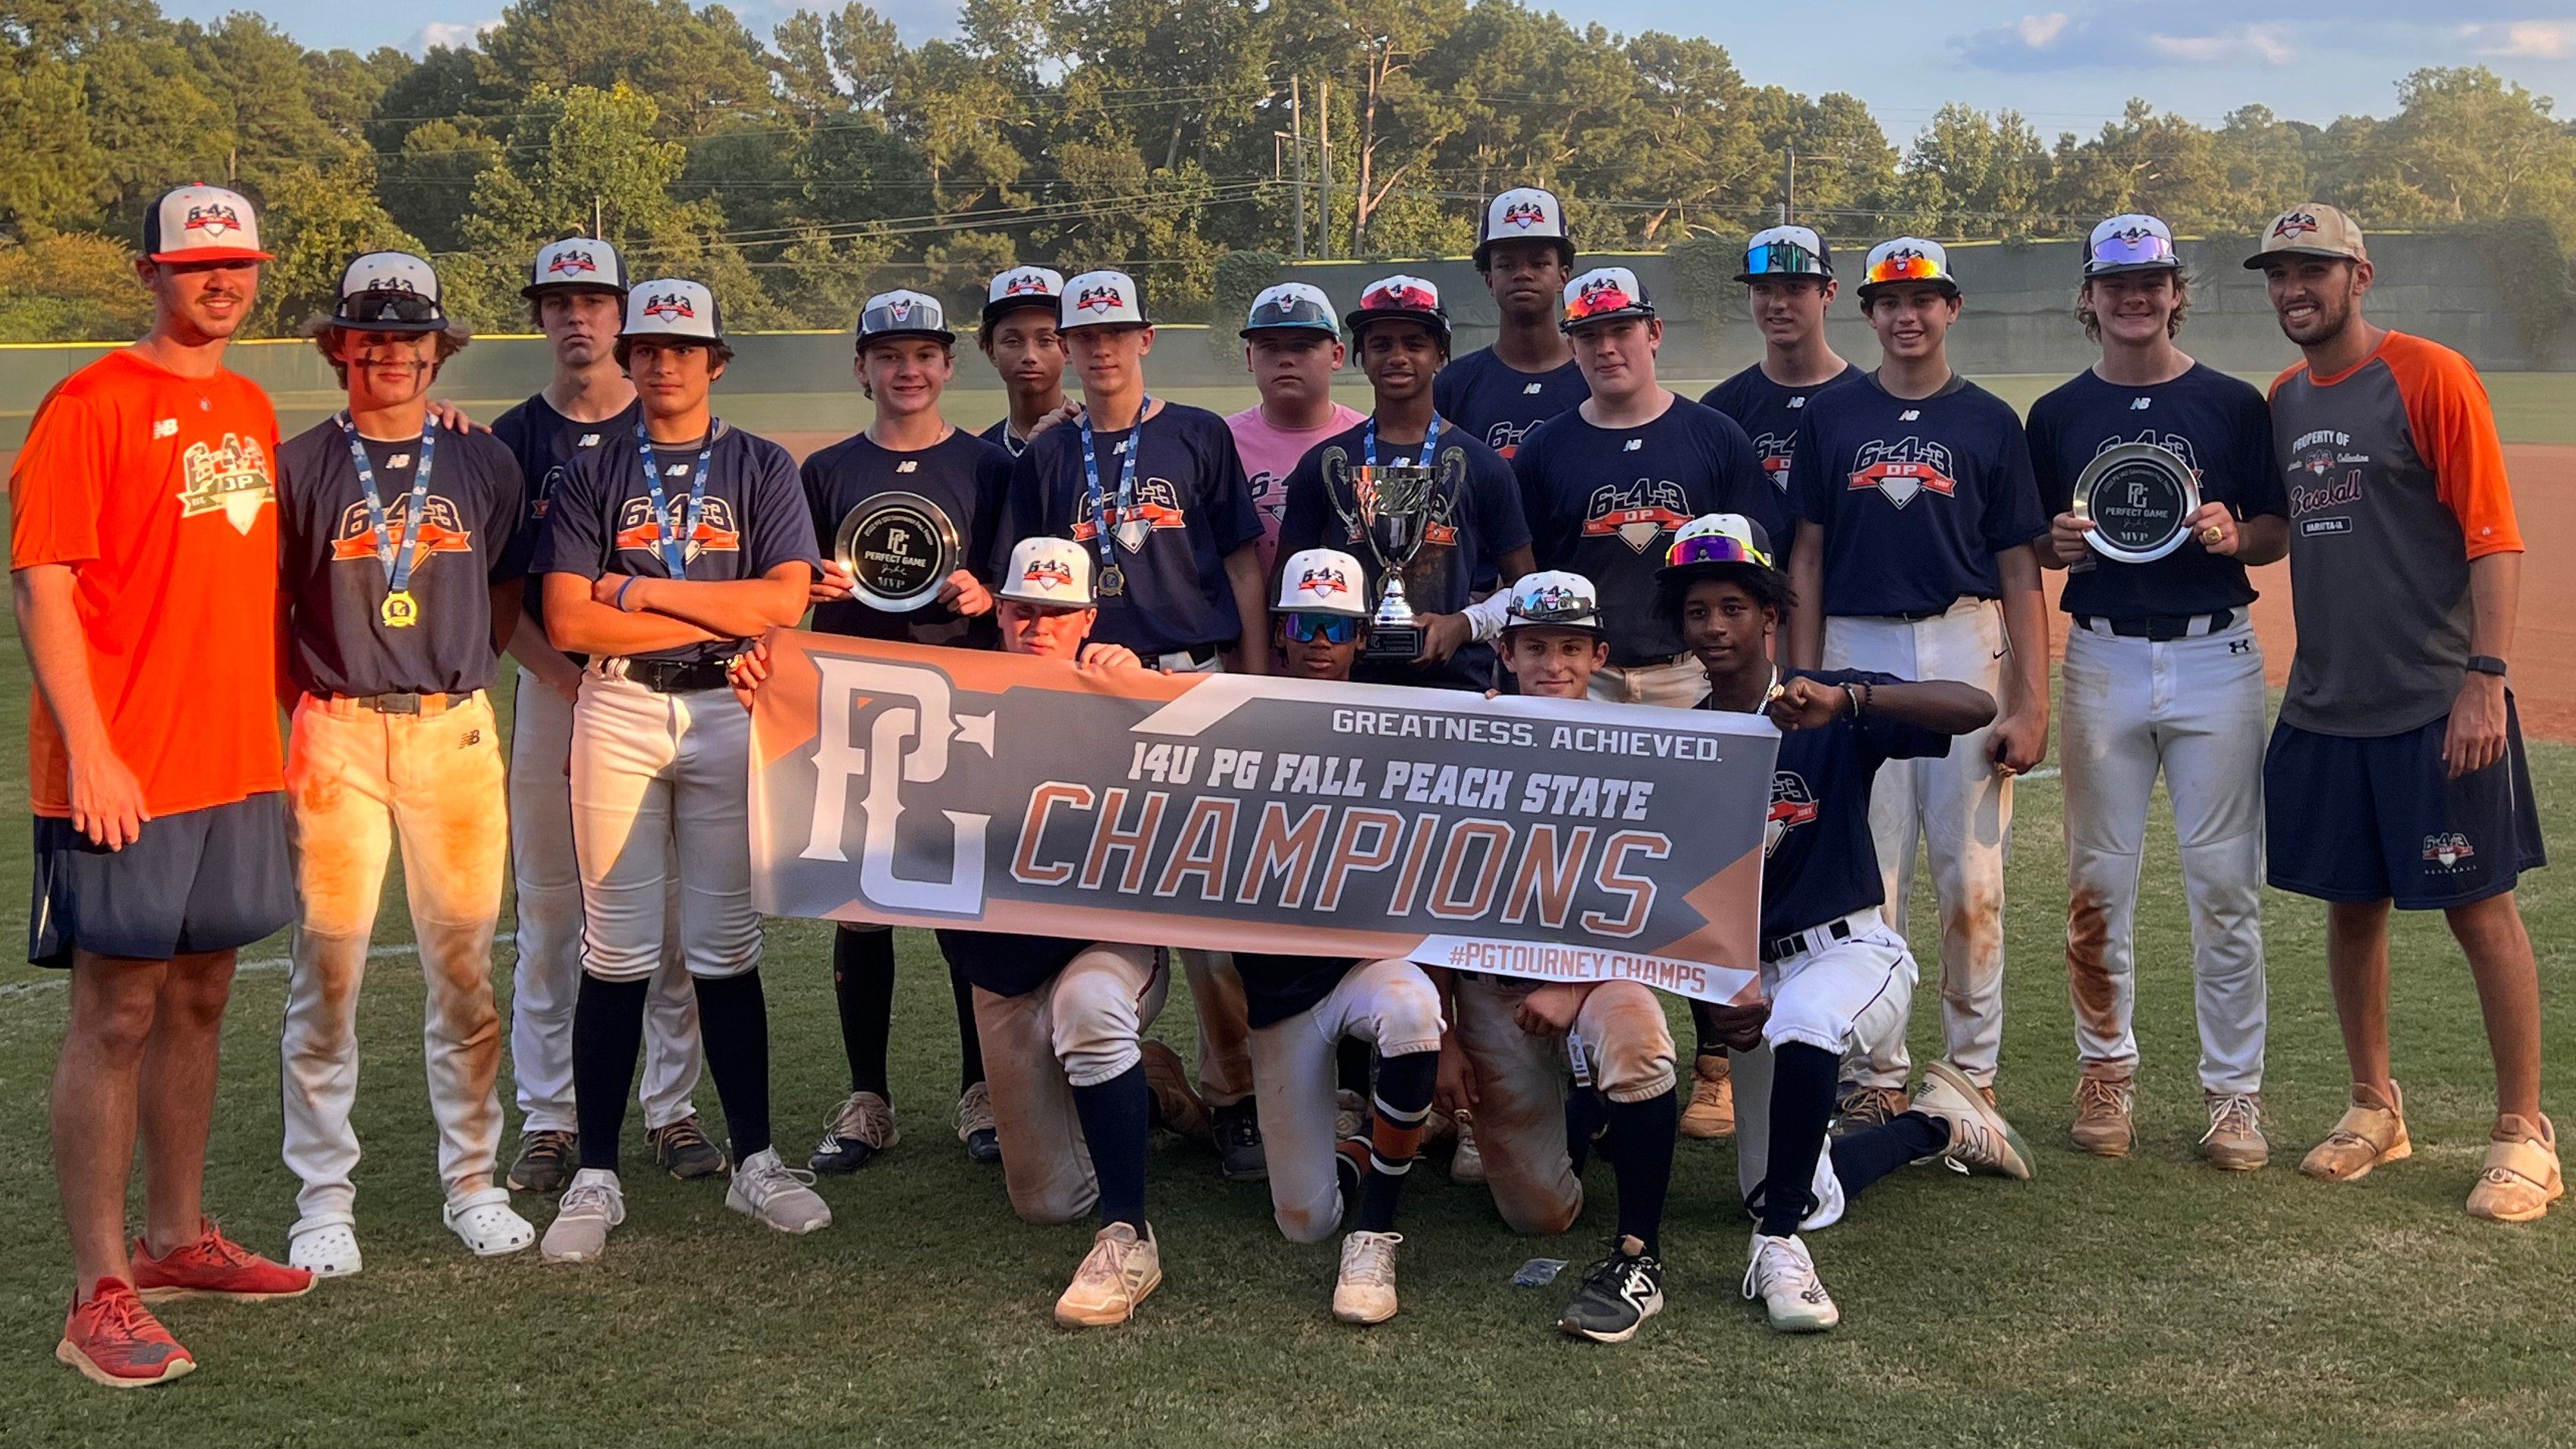 6-4-3 DP Baseball on Twitter: "ICYMI - Congratulations to the 6-4-3 DP Cougars 14U squad for winning the 14U PG Fall Peach State Invitational earlier this month! Cougars finished weekend